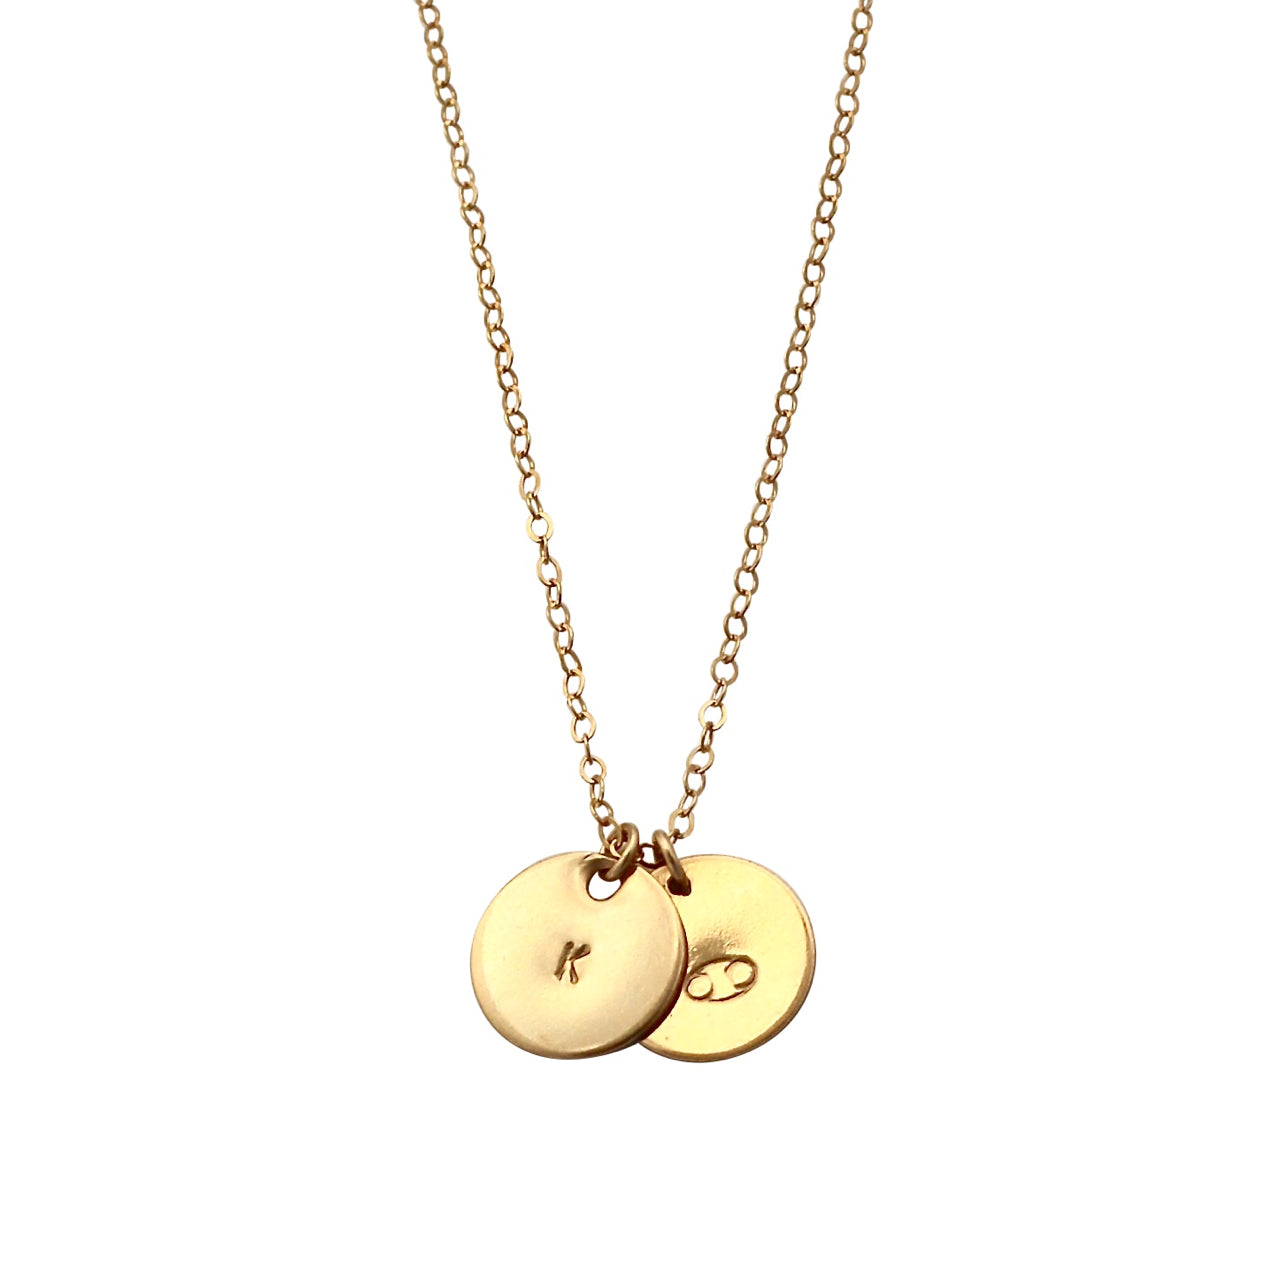 Gold Zodiac Sign necklace with two discs